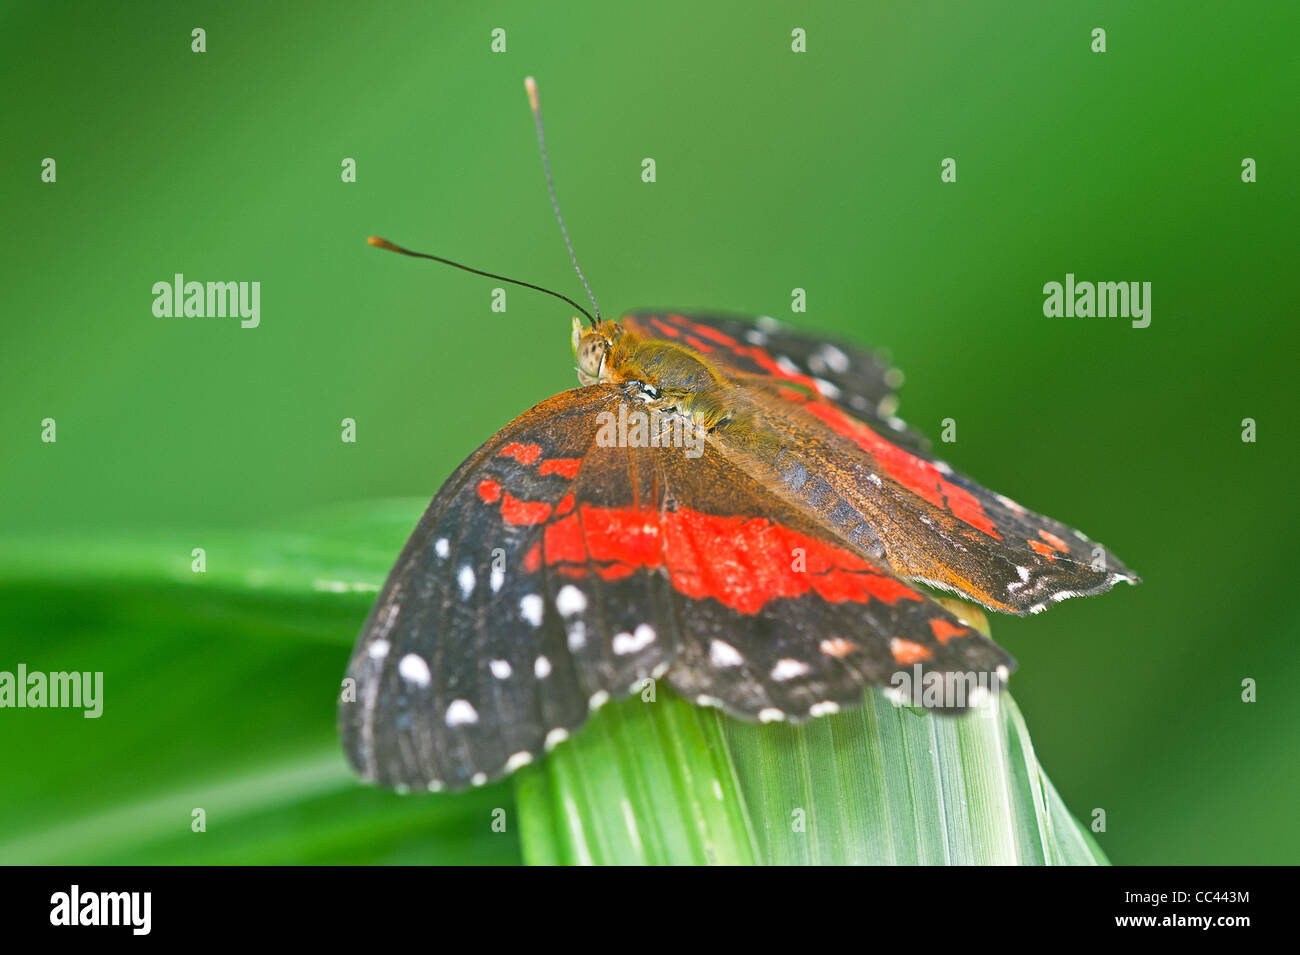 A Scarlet Peacock butterfly at rest Stock Photo